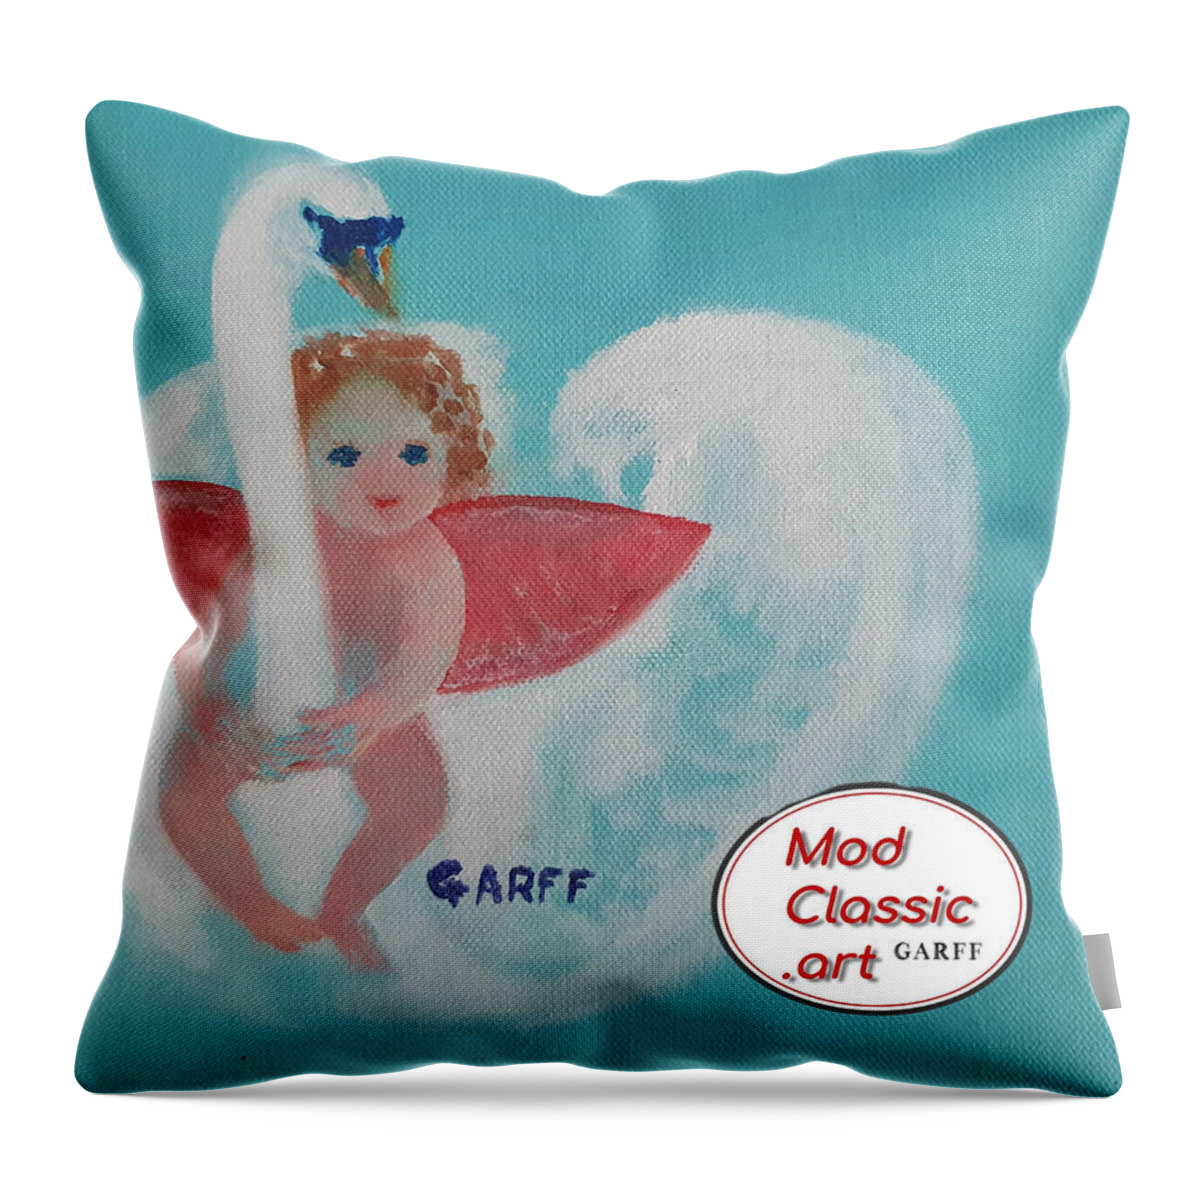 Cupid Throw Pillow featuring the painting Amorino with Swan ModClassic Art by Enrico Garff